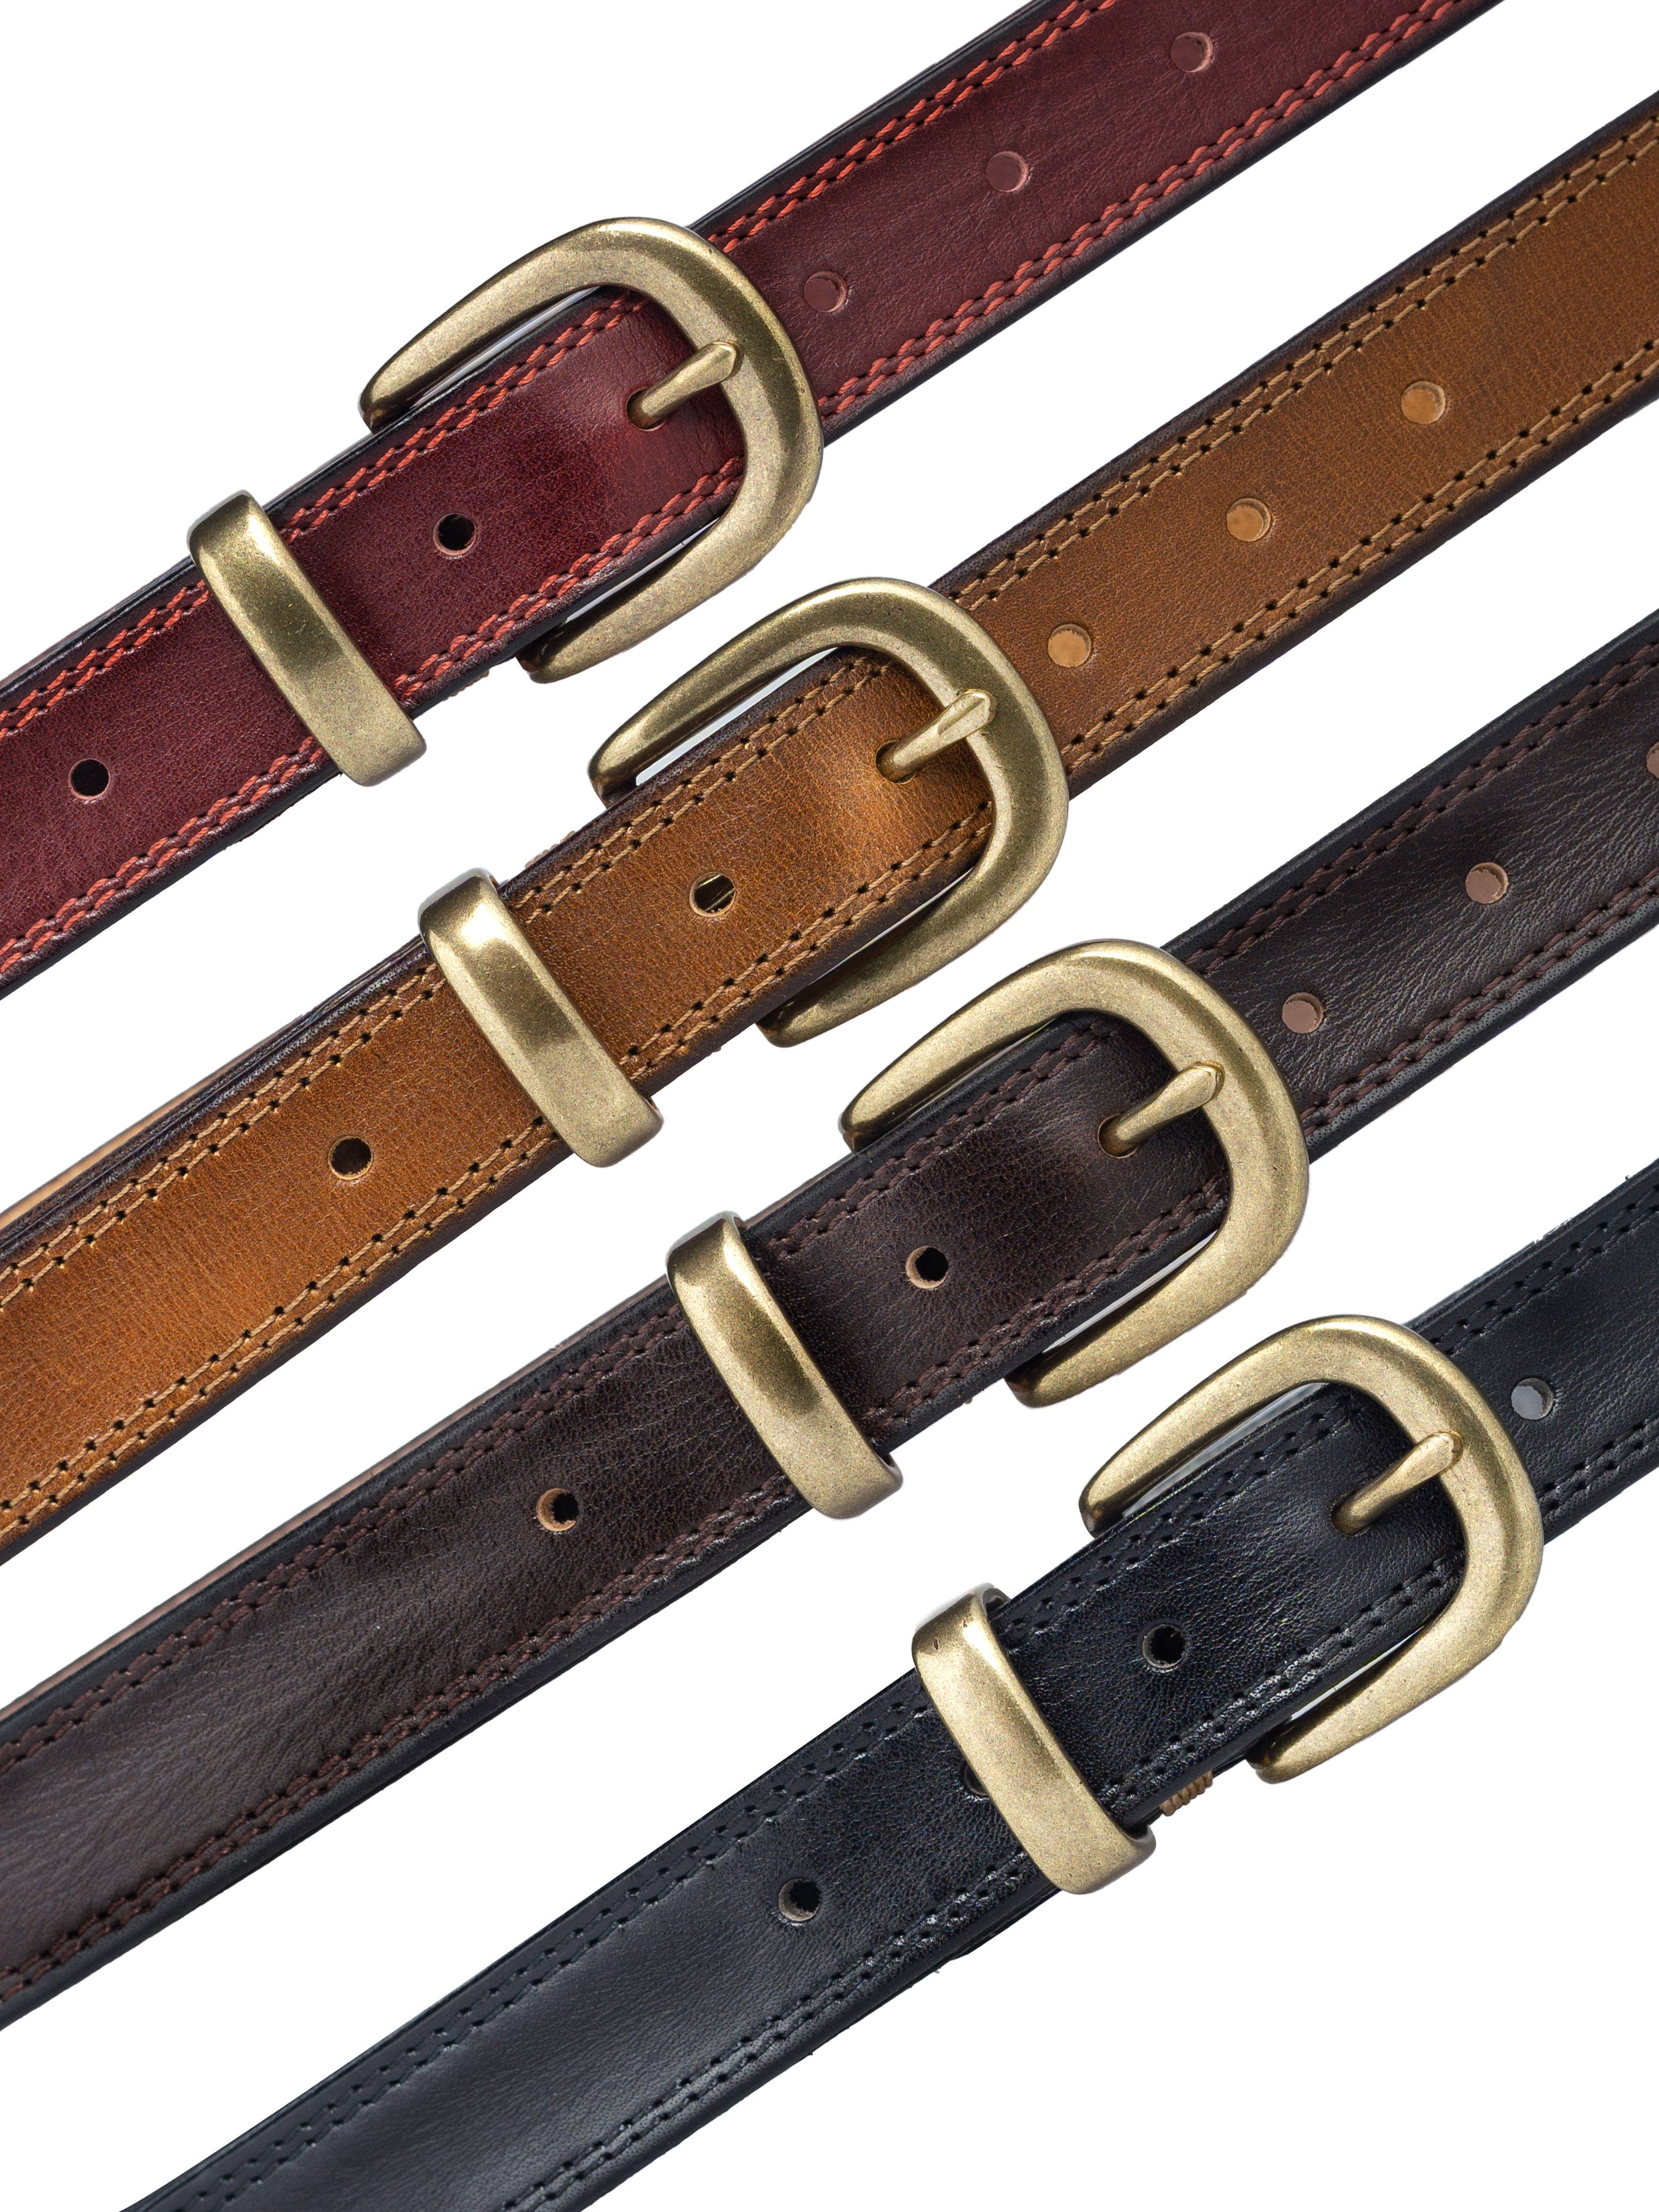 Leather Belt with Horseshoe Gold-toned Buckle with Stitching - Zeve Shoes